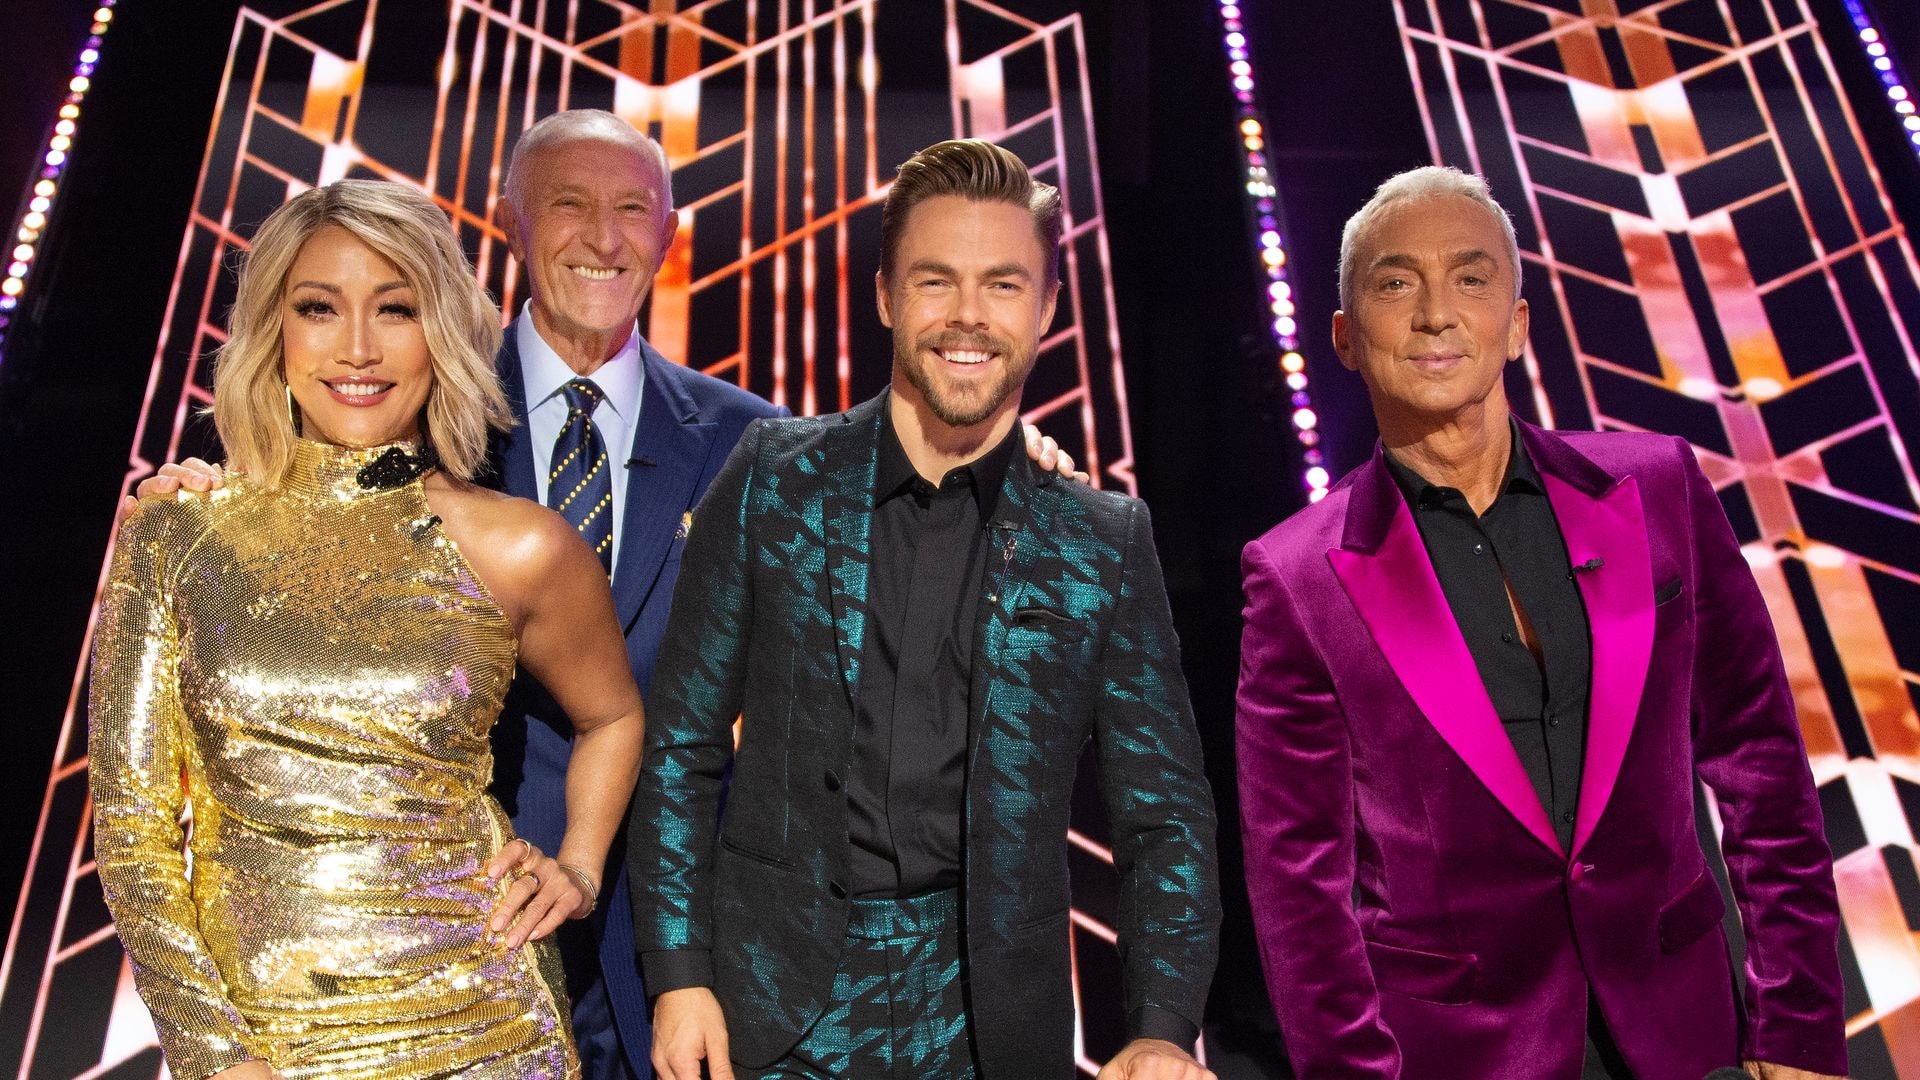 The judges on ABC's "Dancing with the Stars"